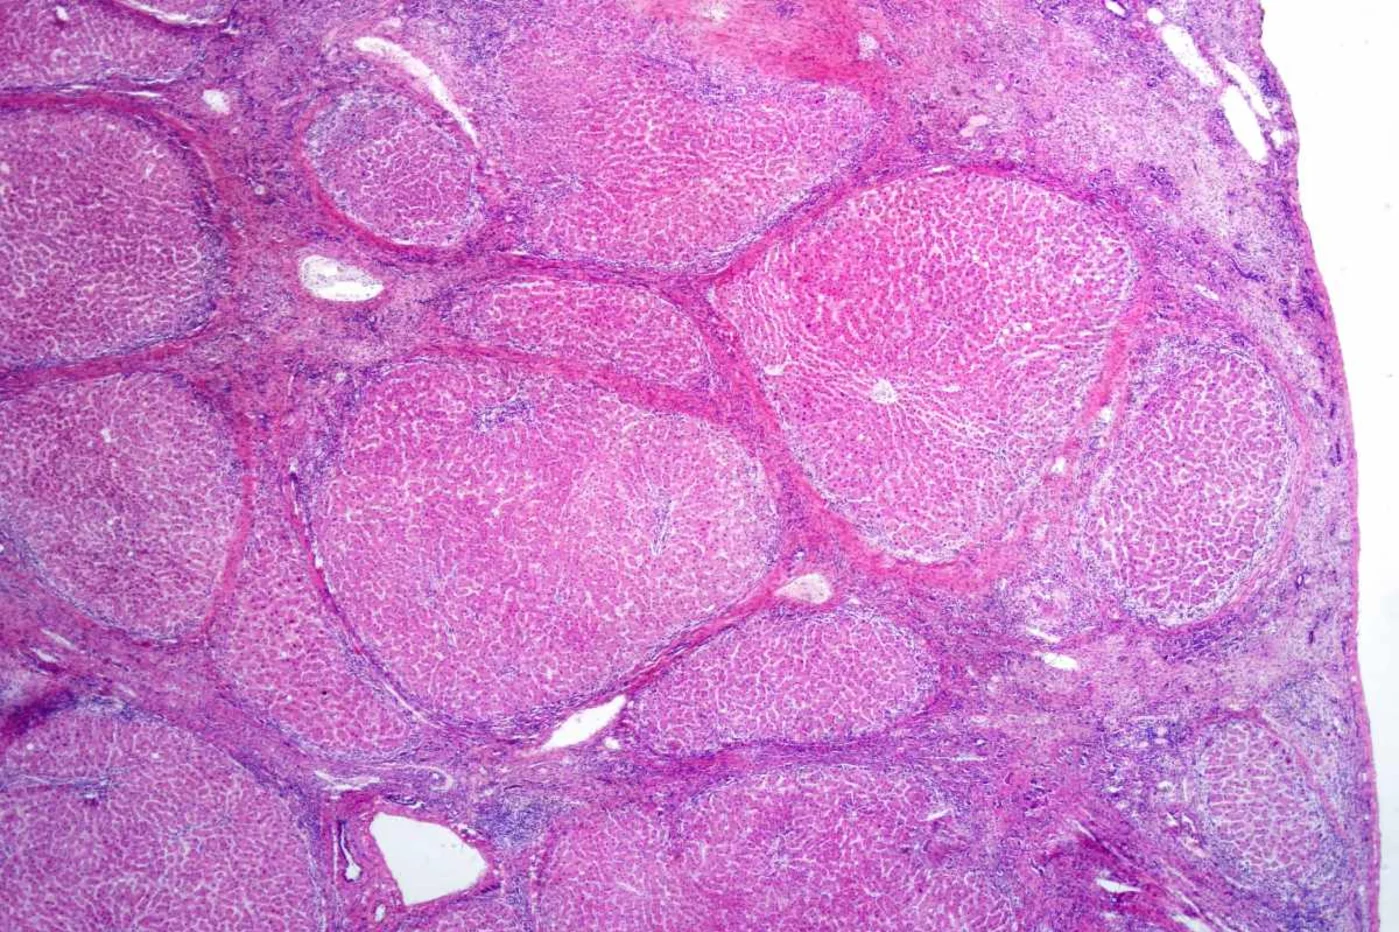 A sample of liver tissue from a person with cirrhosis.  Photo: Shutterstock